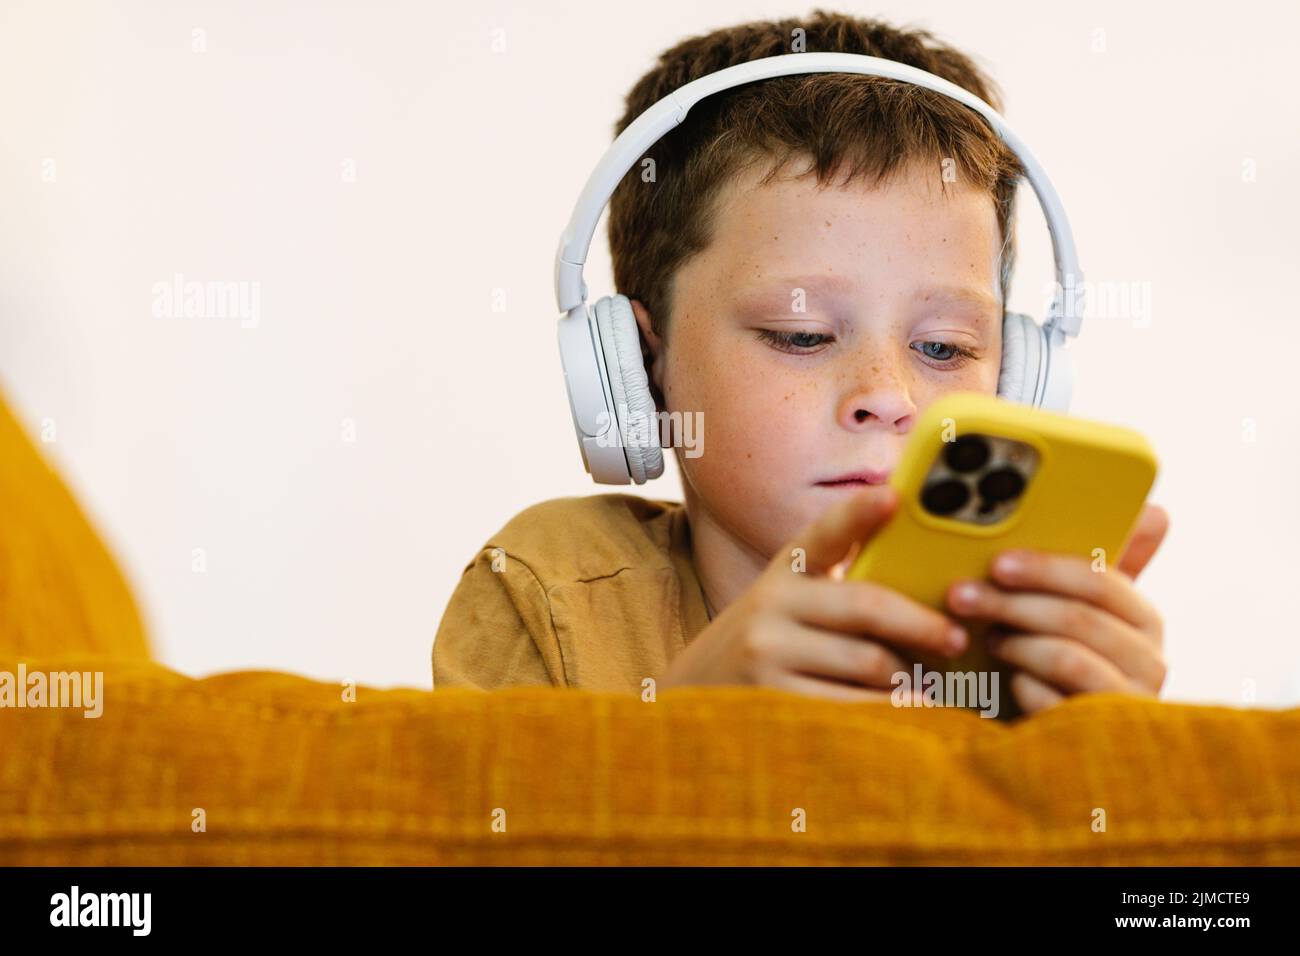 Focused boy lying on a sofa listening to music with headphones on his head and using the mobile phone Stock Photo